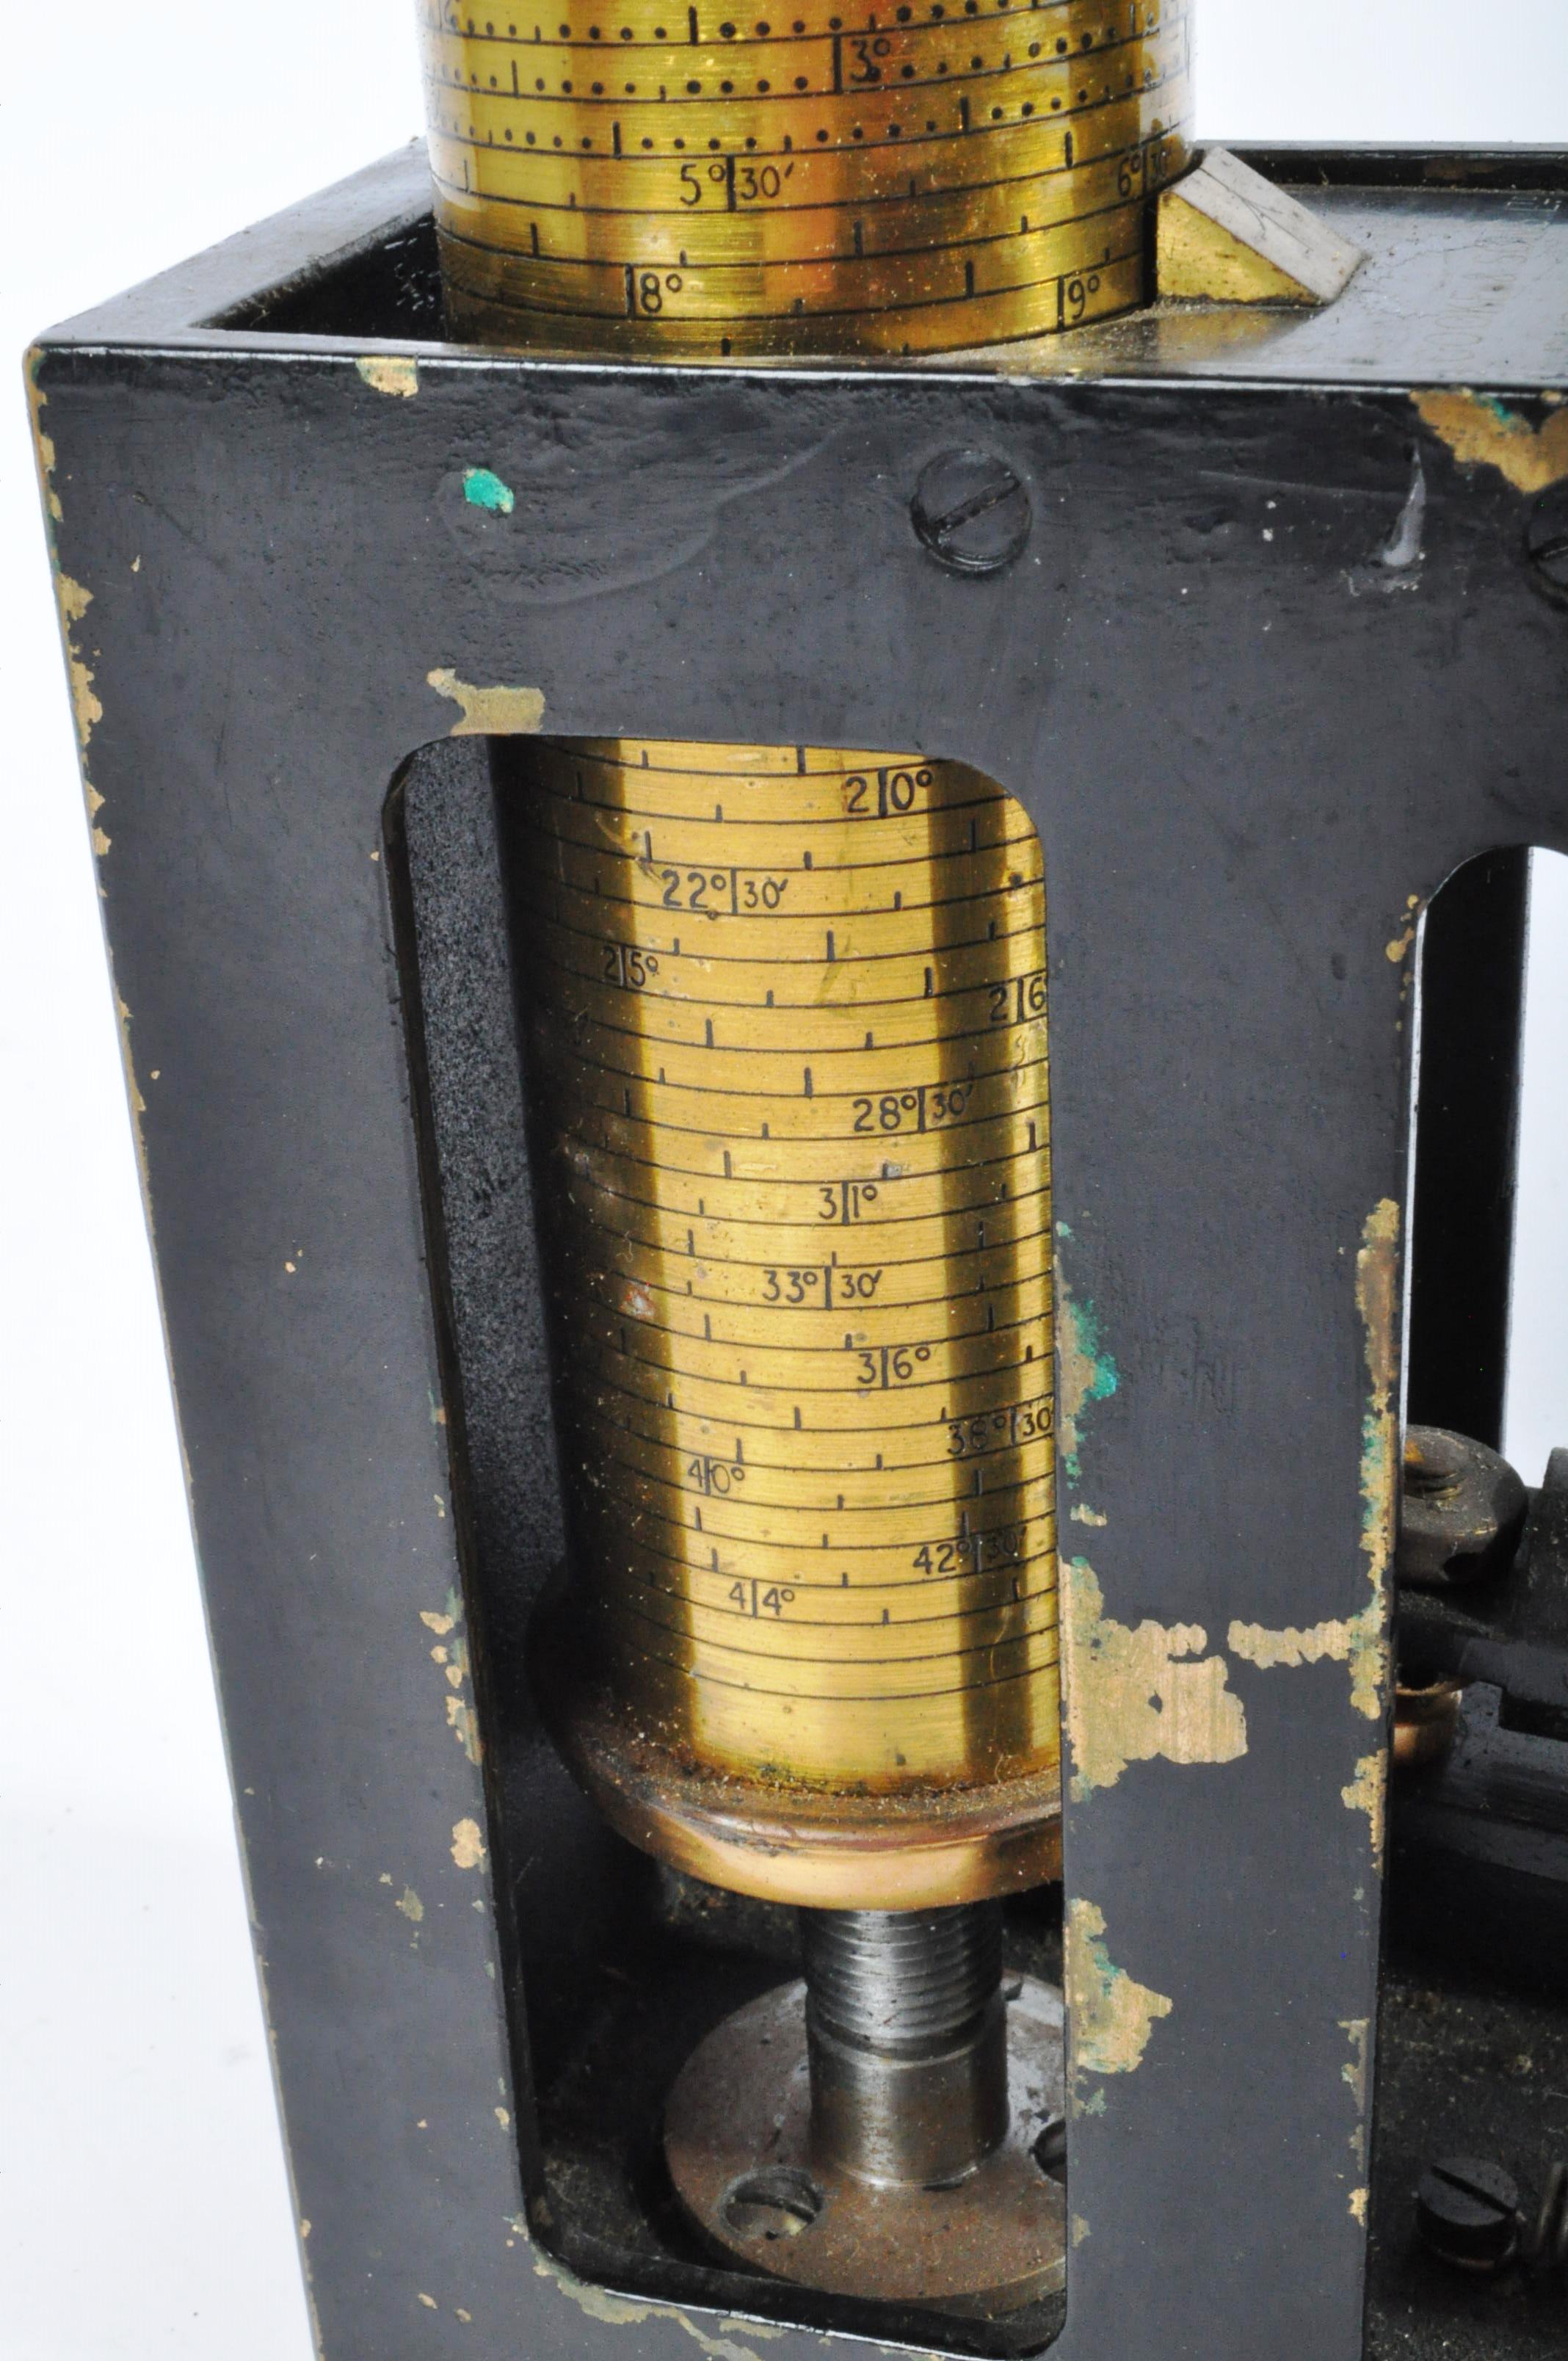 EDWARDIAN 1903 BRITISH ARMY T. COOKE & SONS CLINOMETER - Image 5 of 10